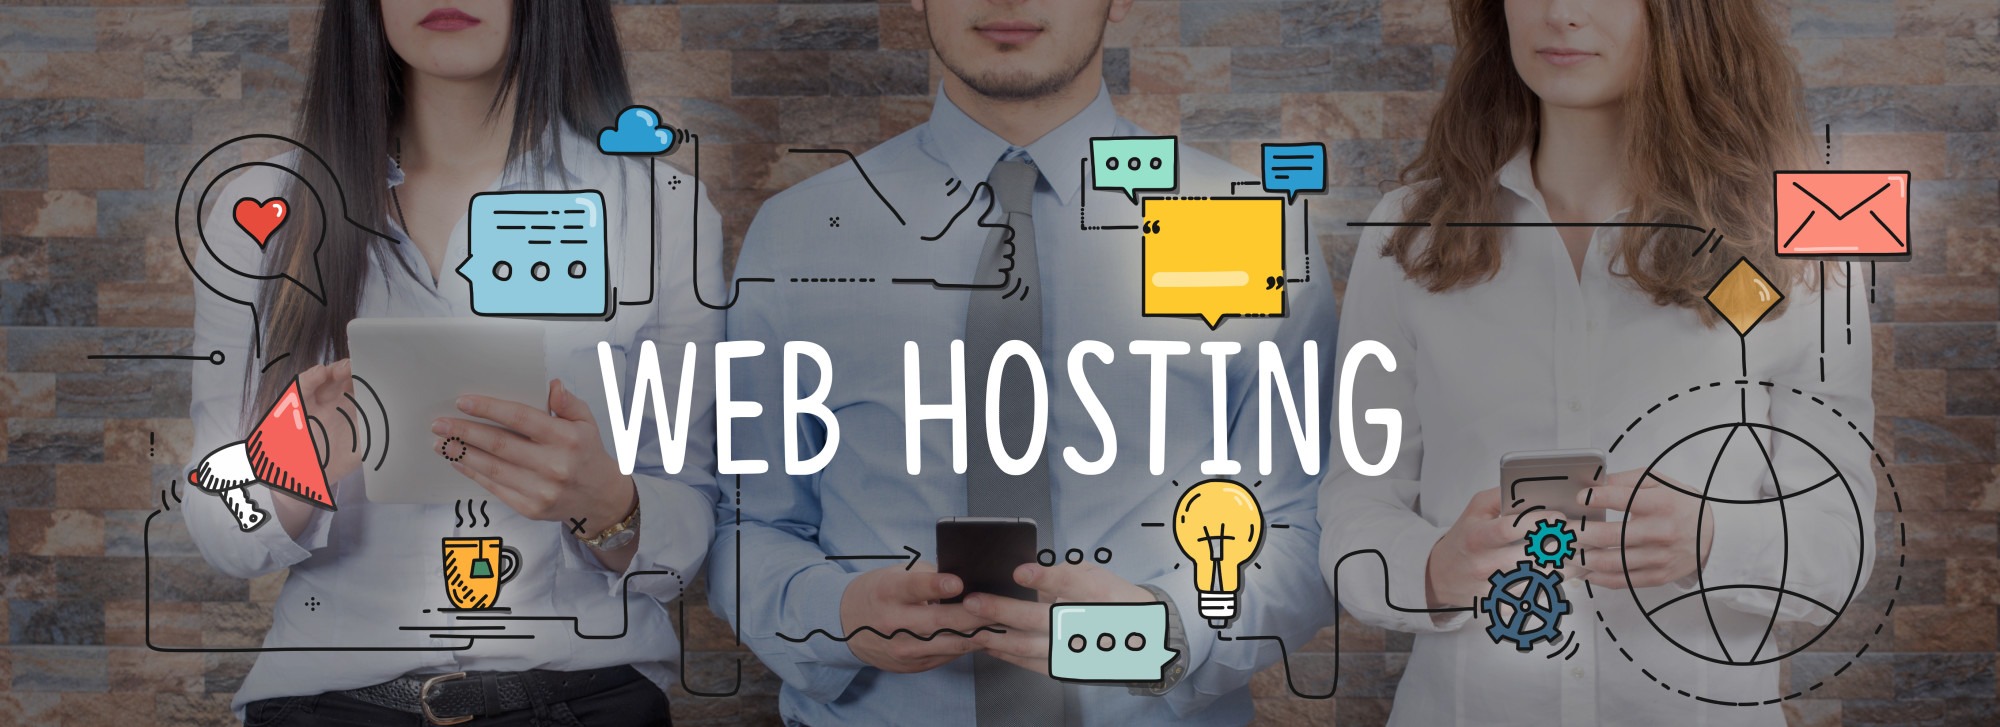 Change Web Hosting in 2020 and Use These Principles to